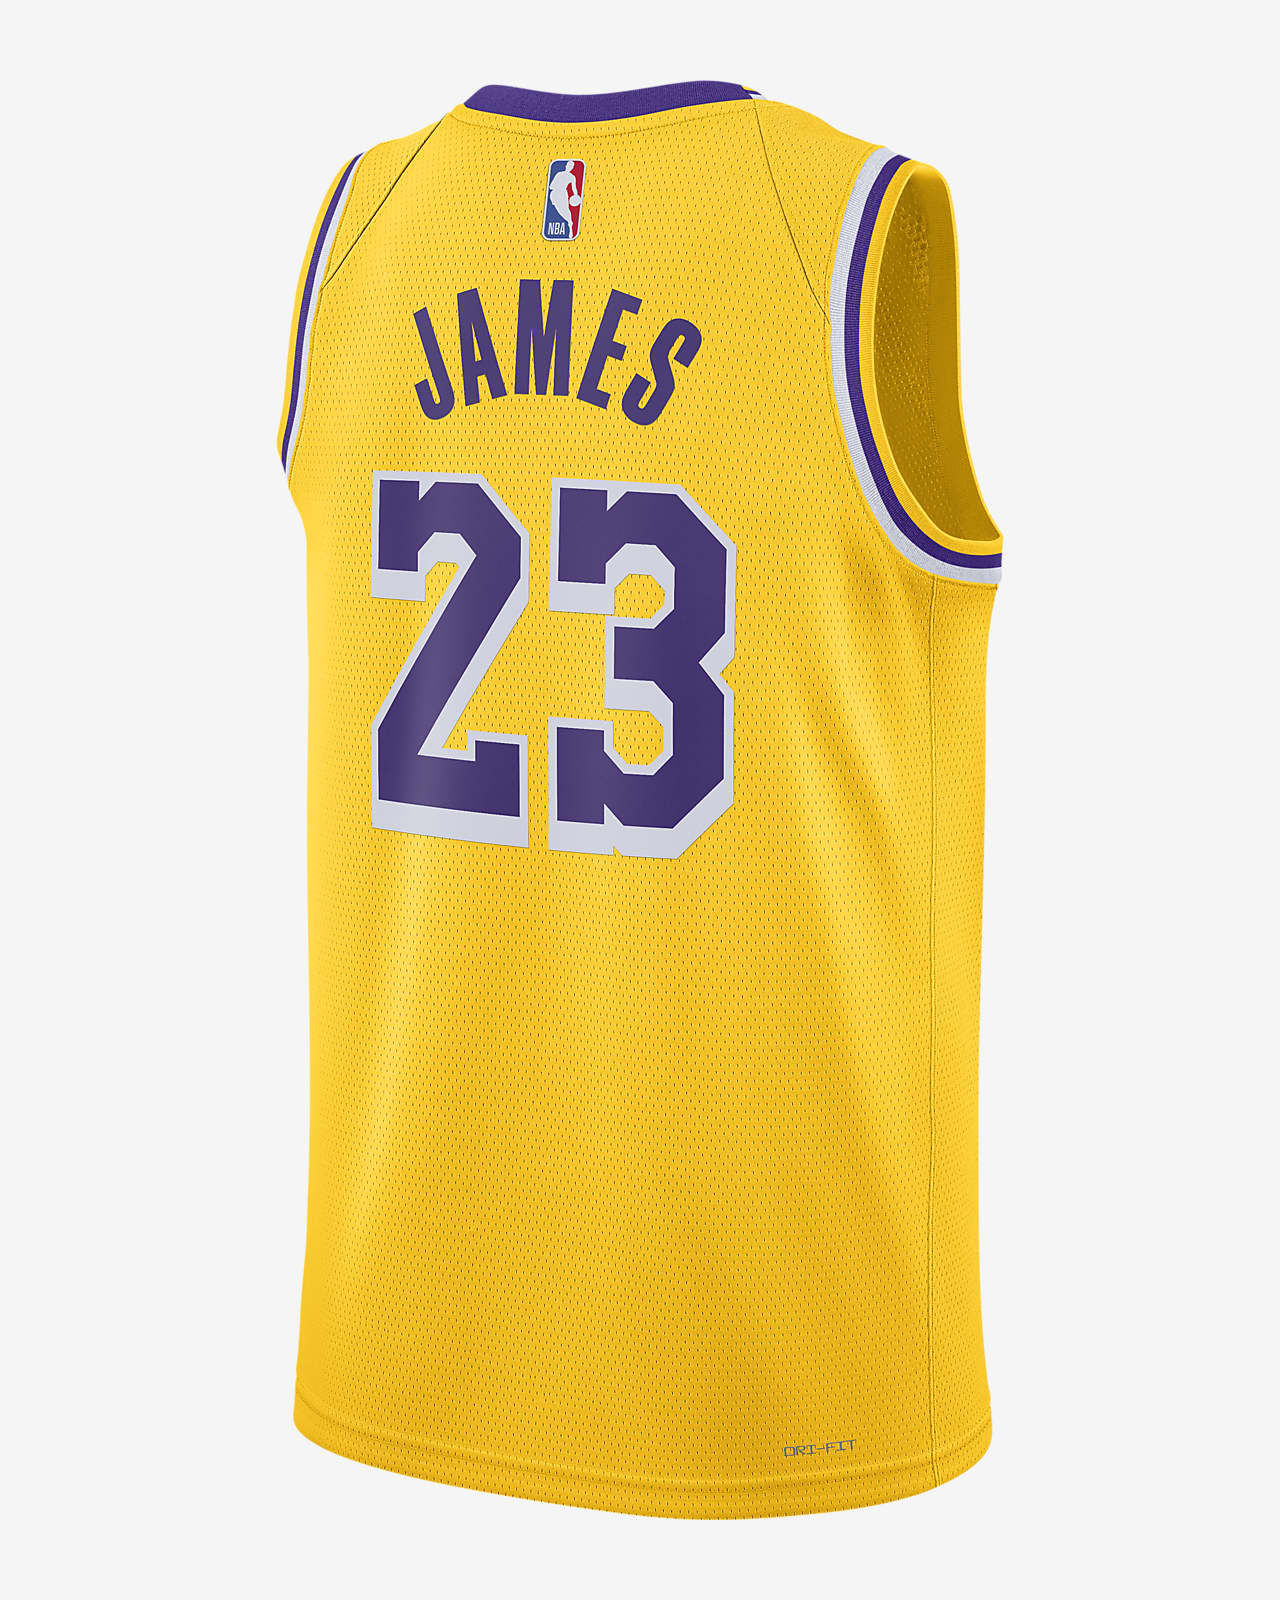 https://static.nike.com/a/images/t_PDP_1280_v1/f_auto,q_auto:eco/b9927fdc-ed13-4f38-af1e-4cd3f19f5359/los-angeles-lakers-icon-edition-2022-23-mens-dri-fit-nba-swingman-jersey-WGBhtS.png